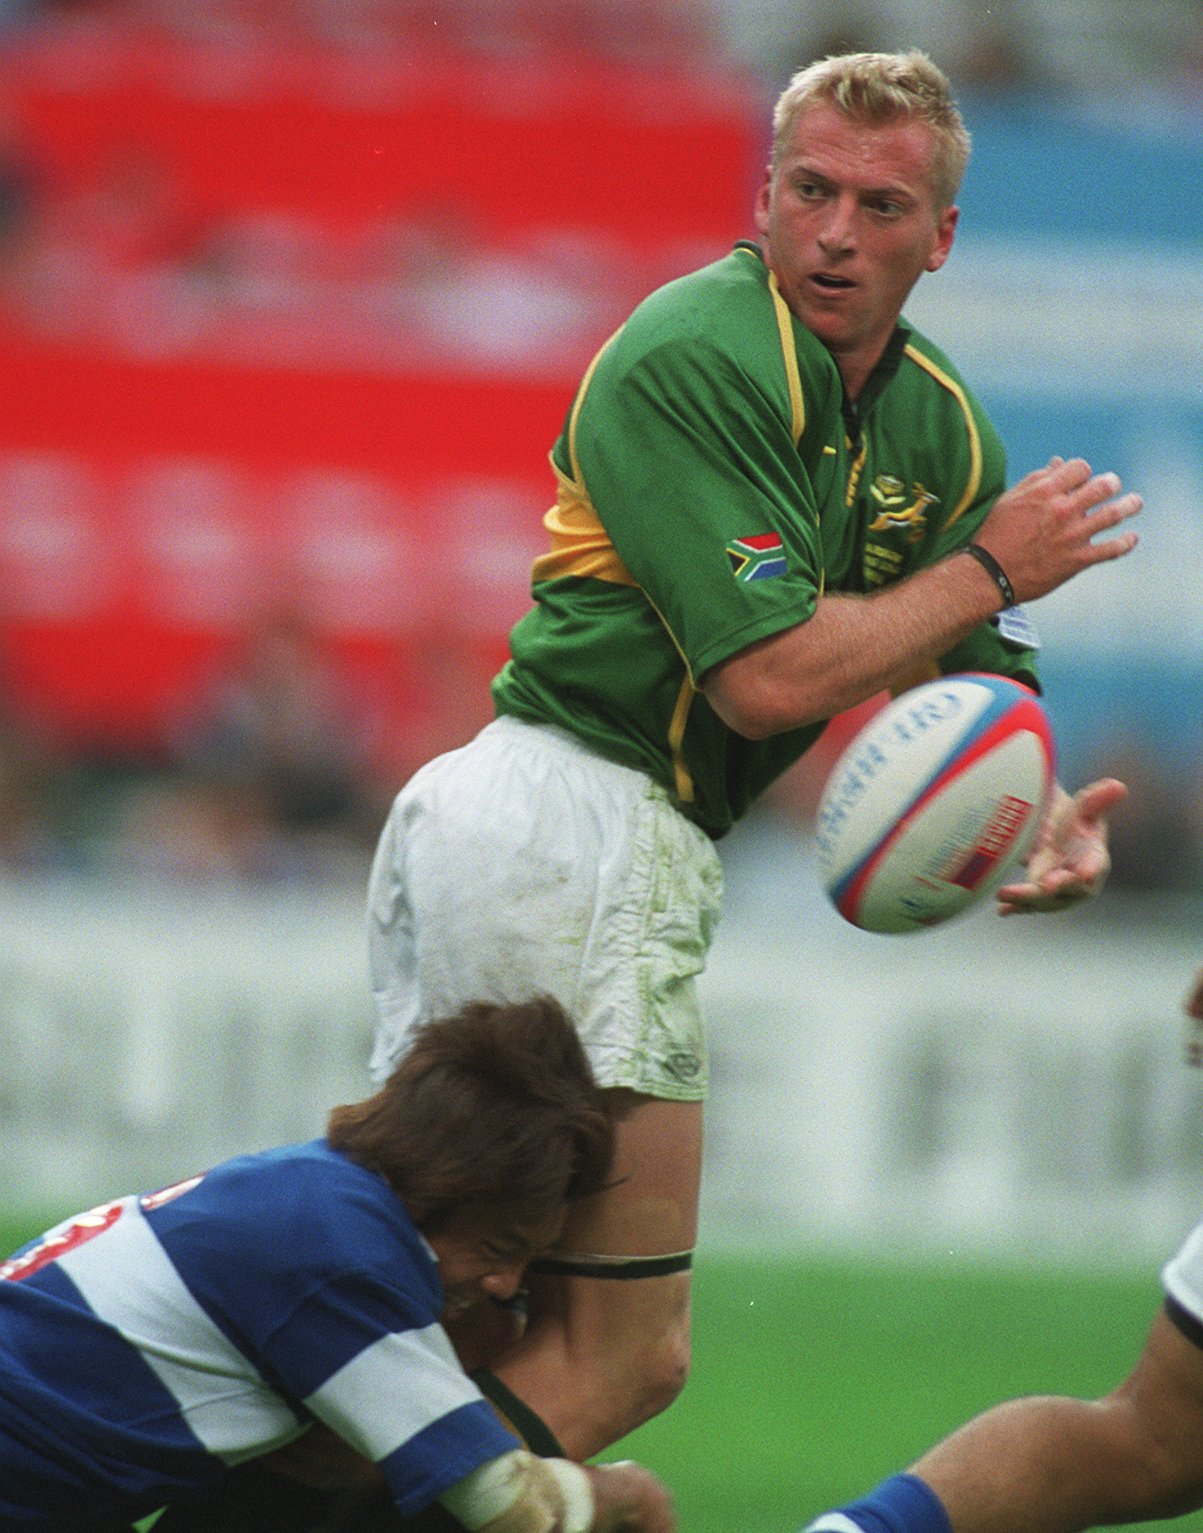 Brent Russell at the 2002 Hong Kong Sevens where he was player of the tournament. The South African will be player/coach of the Iranz side. Photo: Ricky Chung